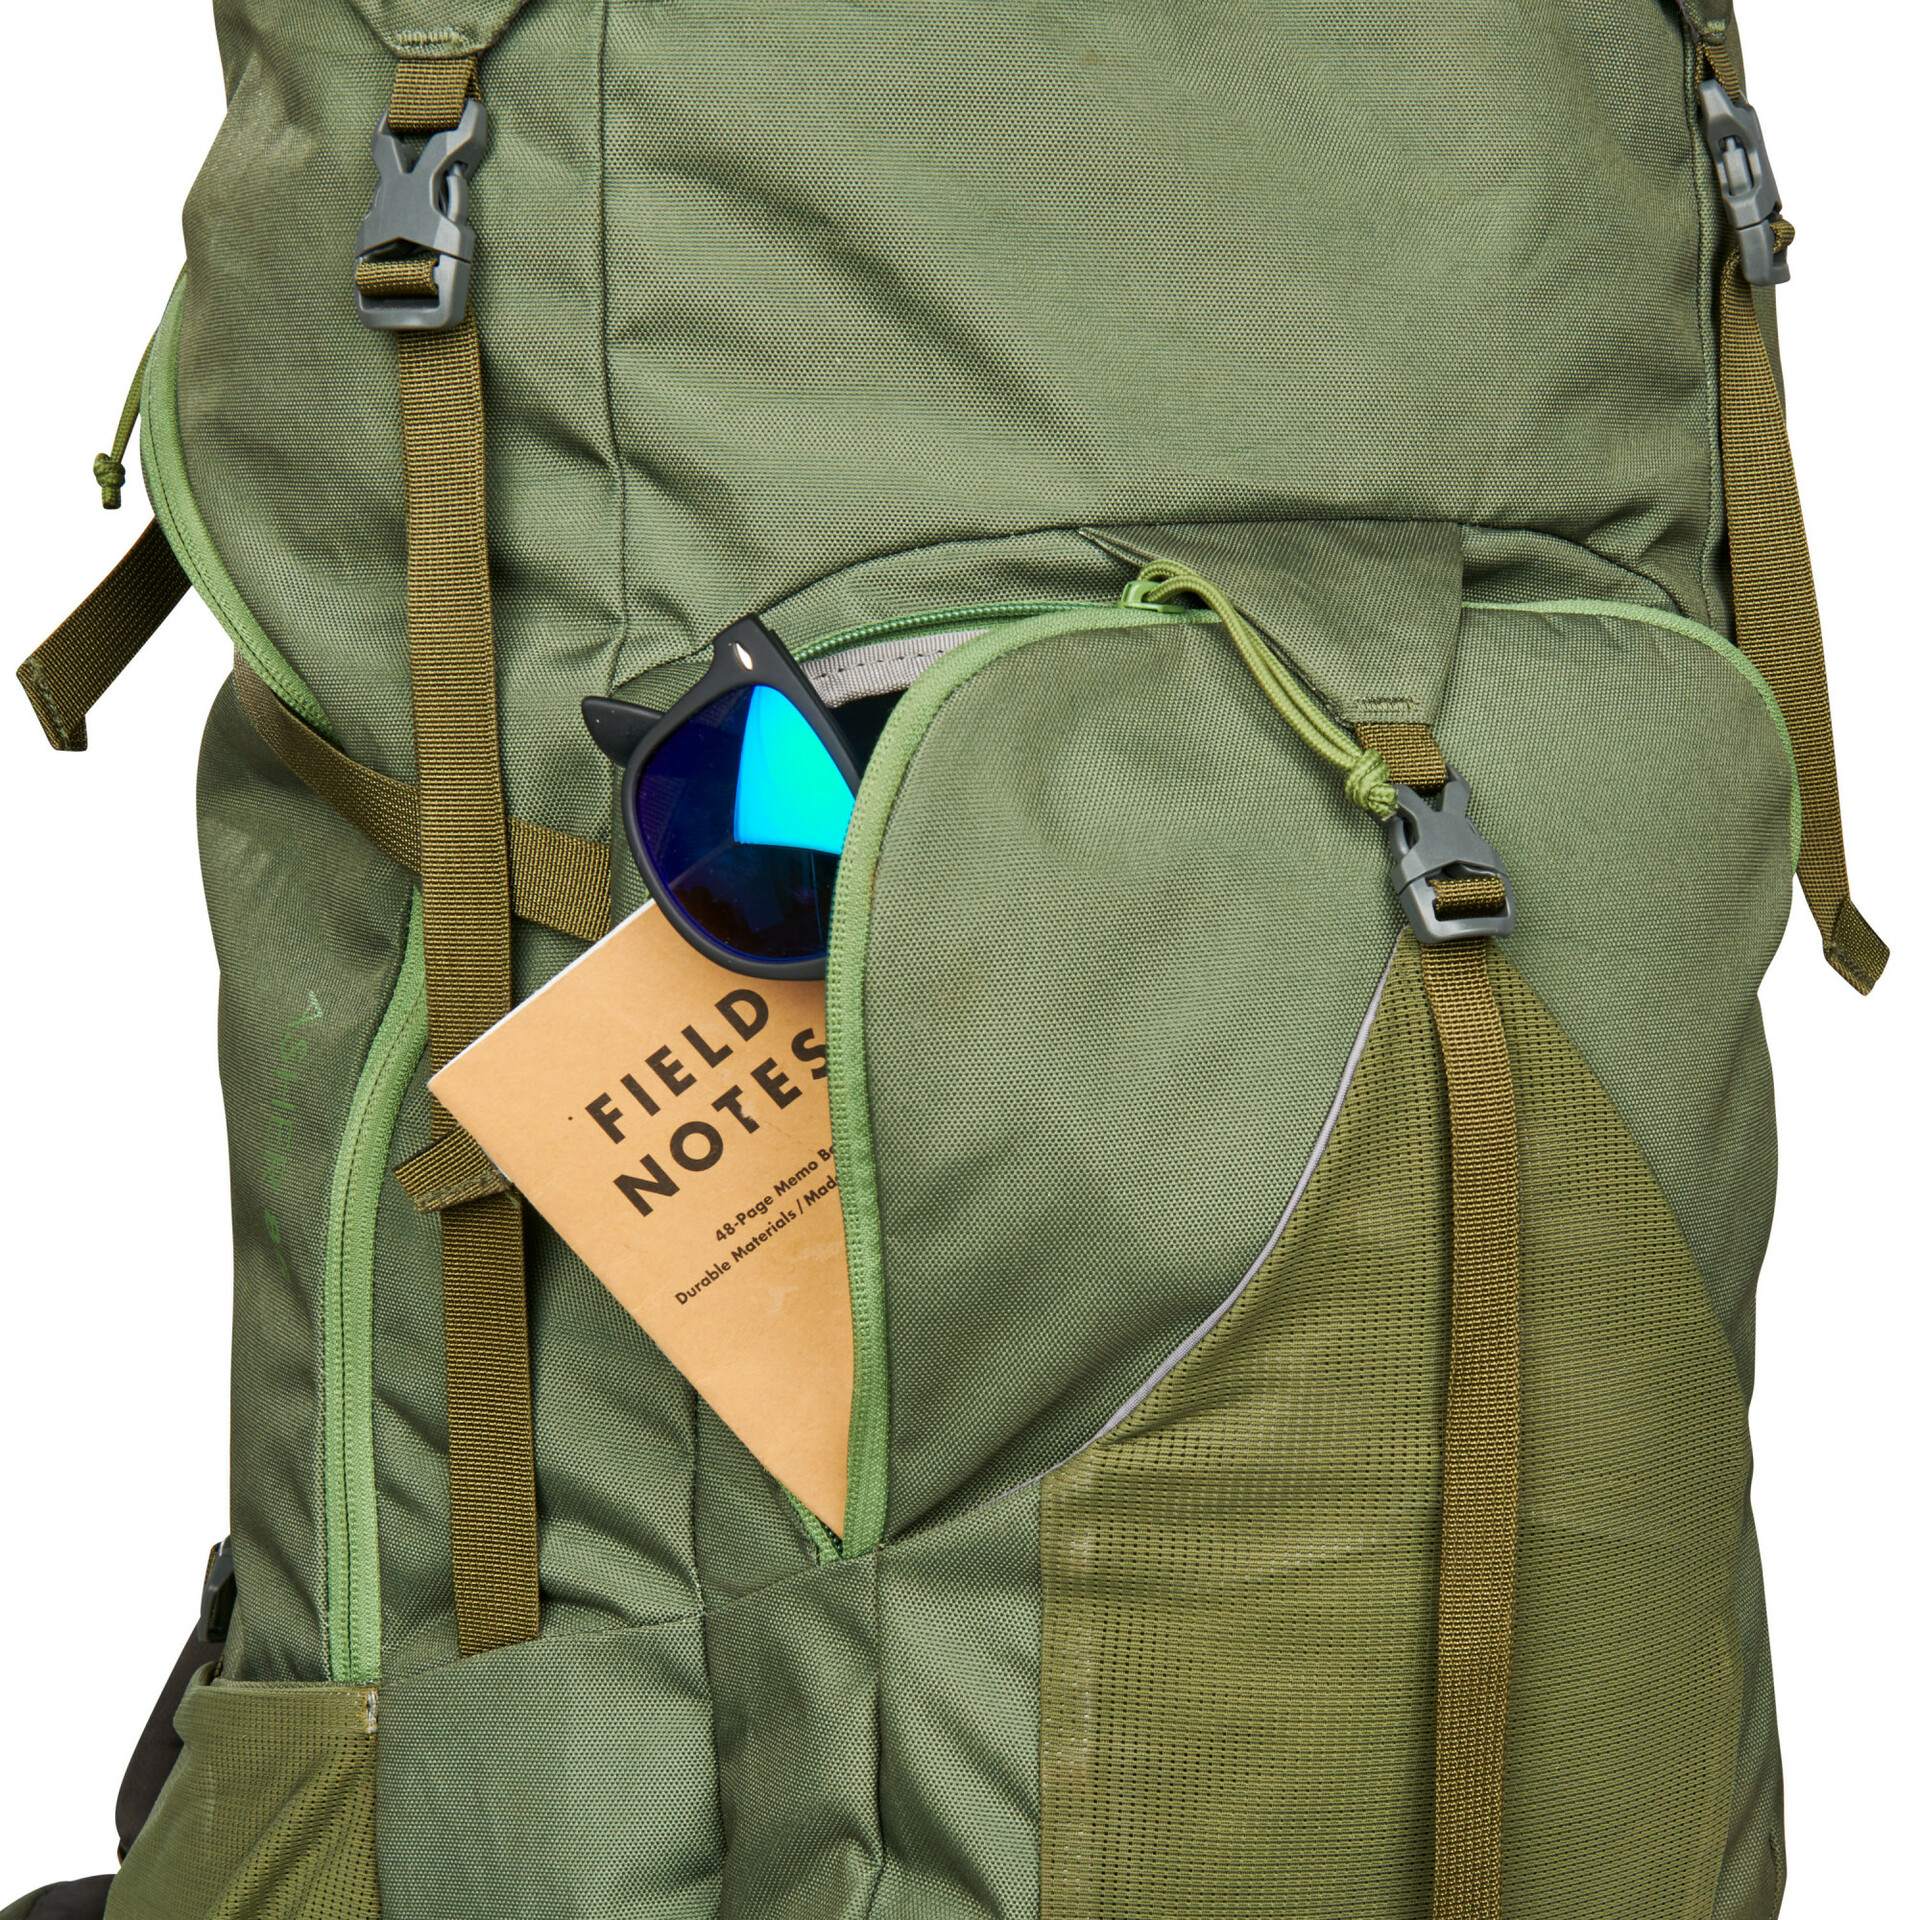 Kelty Asher 85 Trail Pack